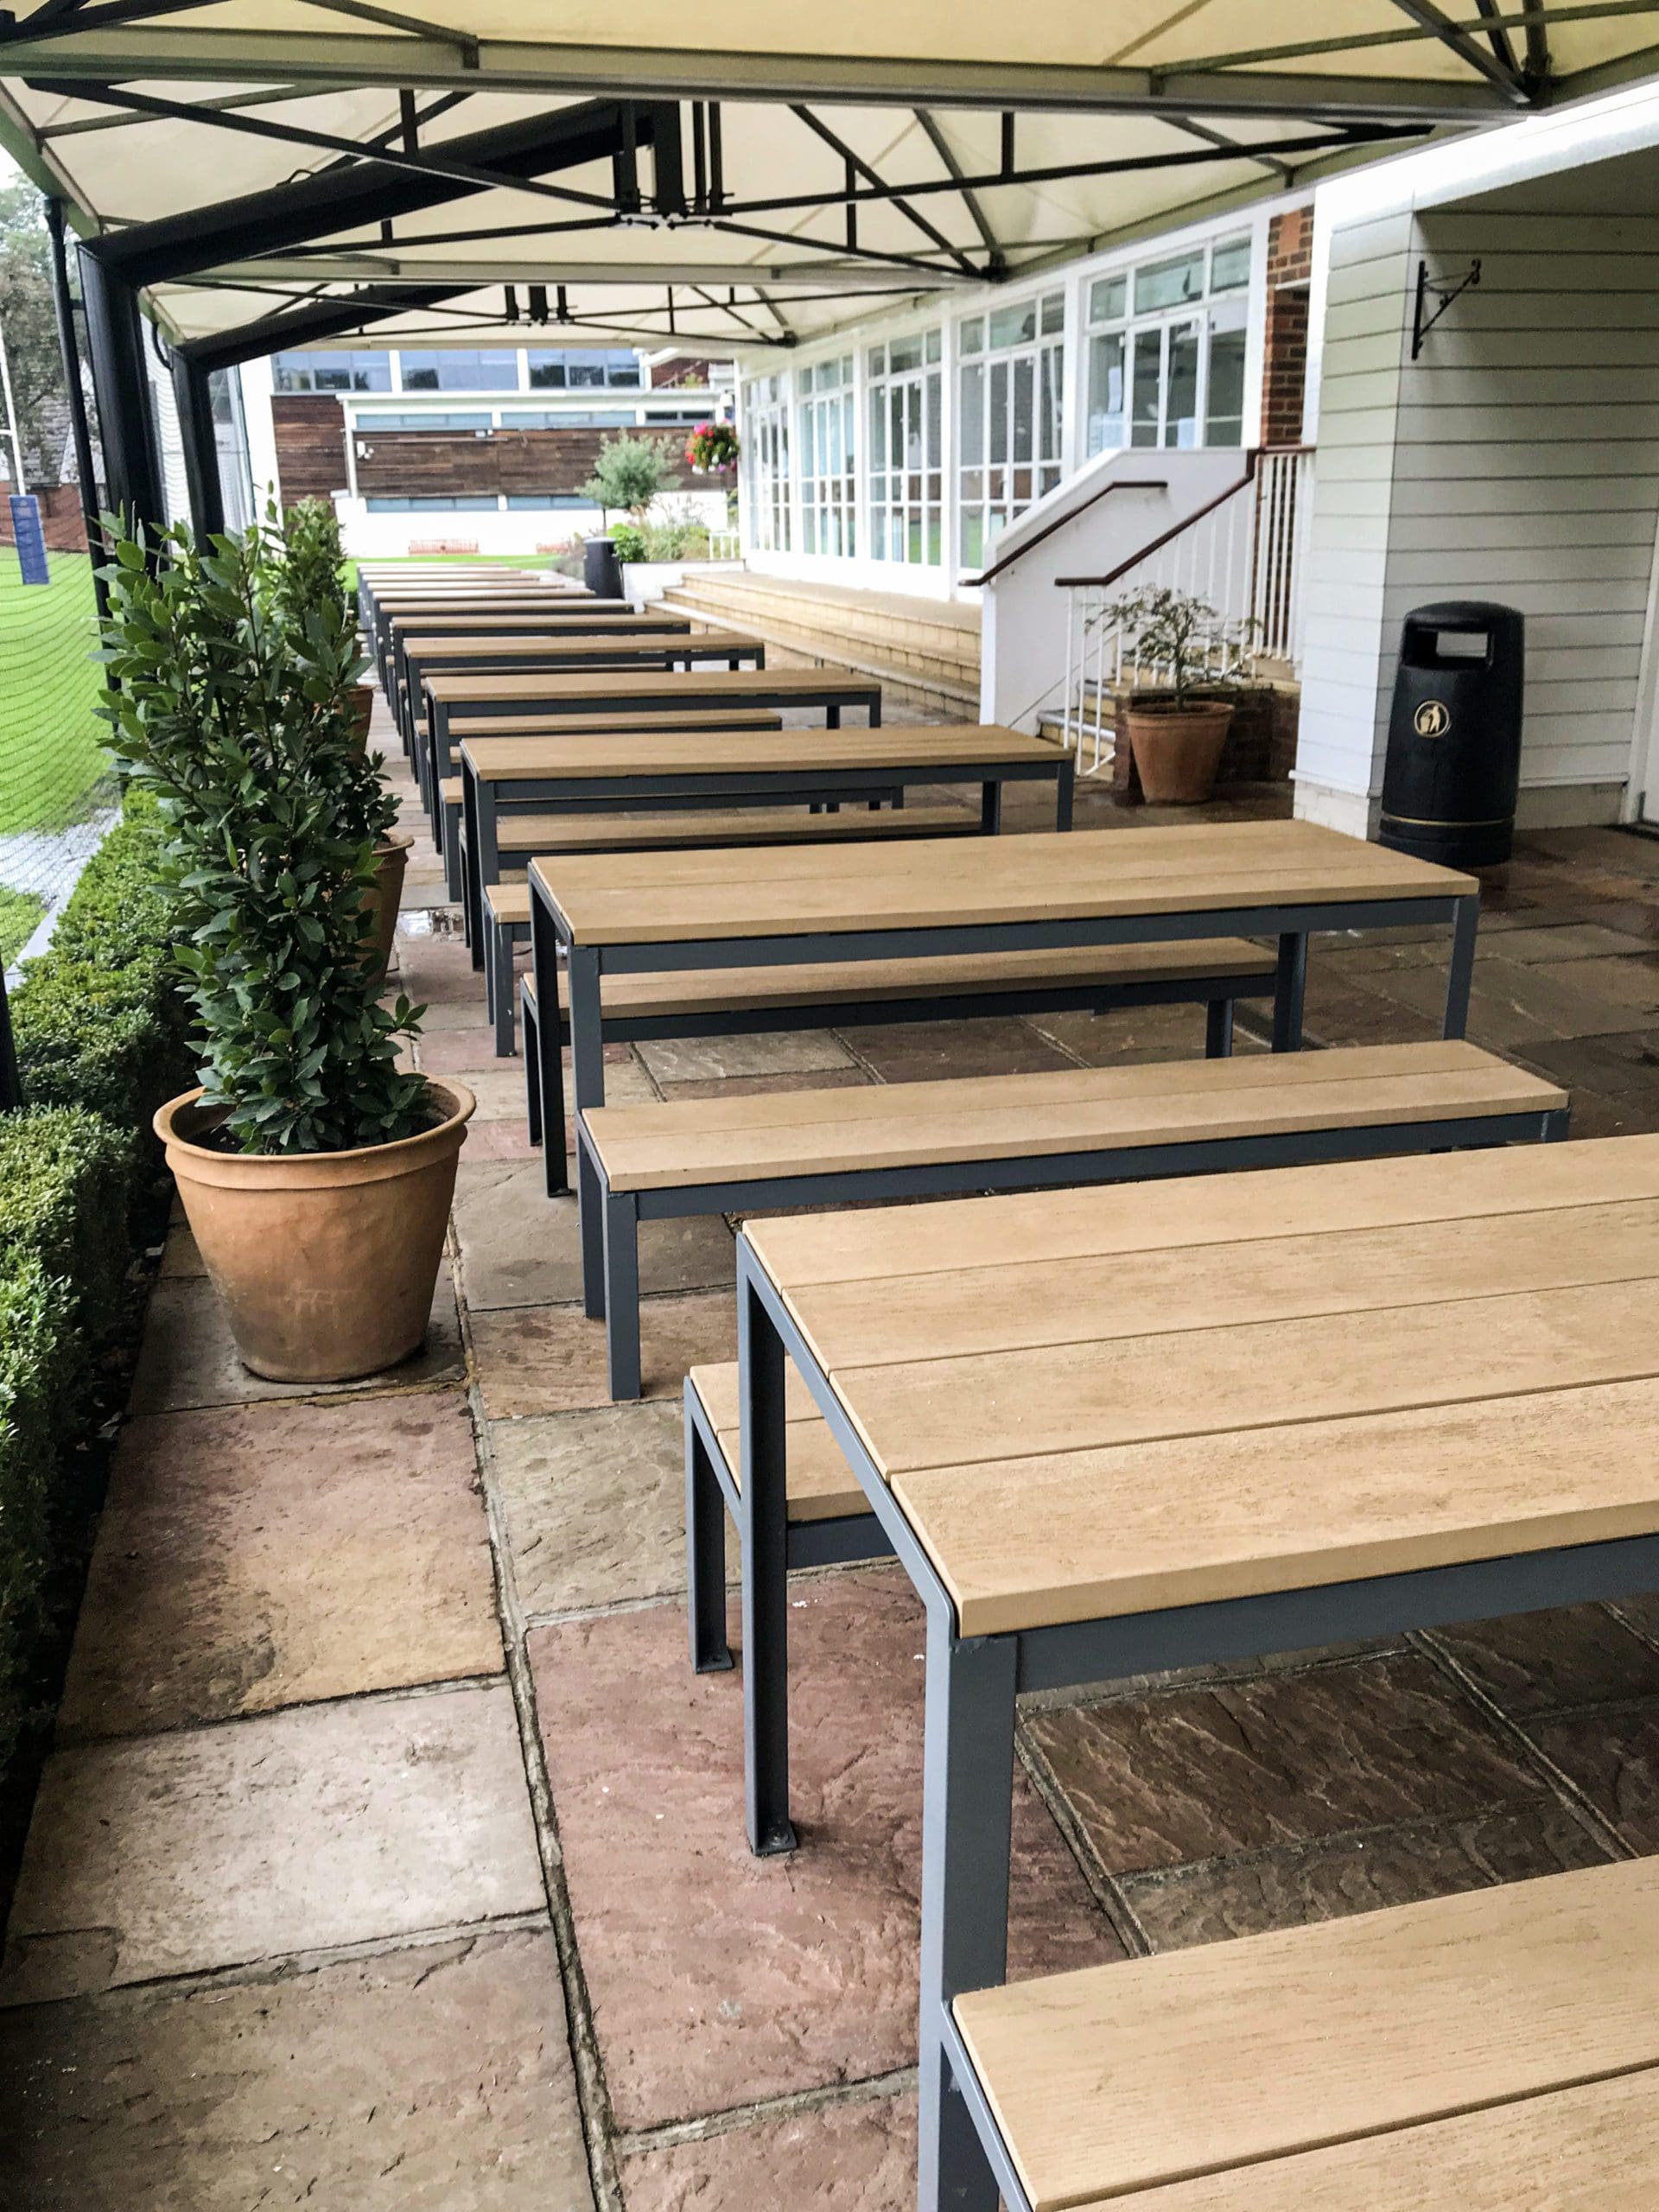 long line of wooden and metal picnic tables with matching benches under long outdoor metal and fabric canopy